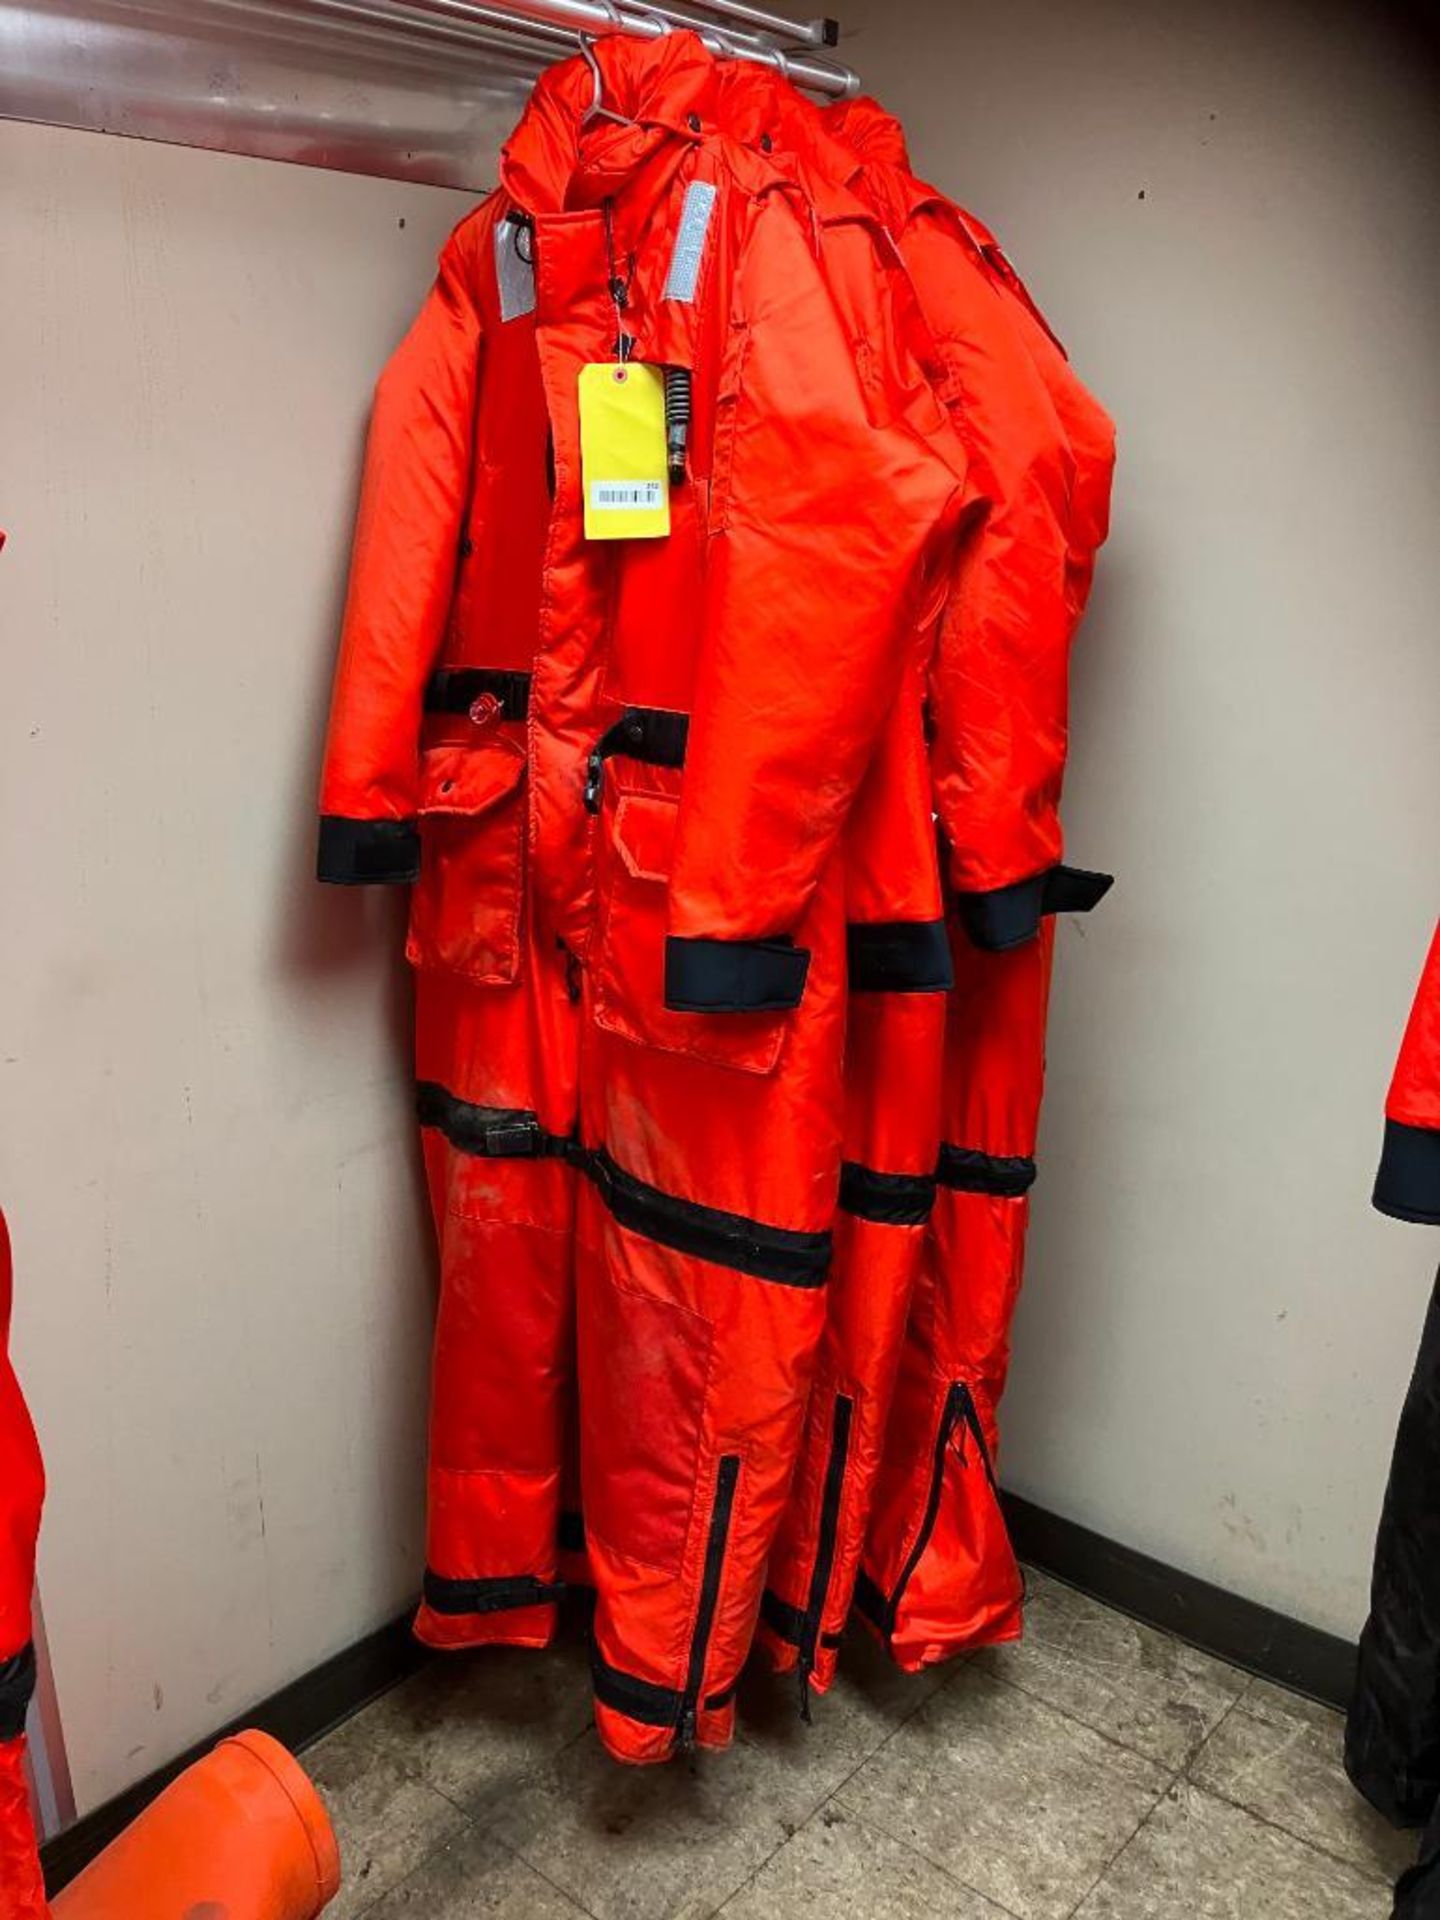 (4) MUSTANG SURVIVAL MS2175 DELUXE ANTI-EXPOSURE WORK SUITS: (1) MEDIUM, (2) LARGE, (1) EXTRA LARGE